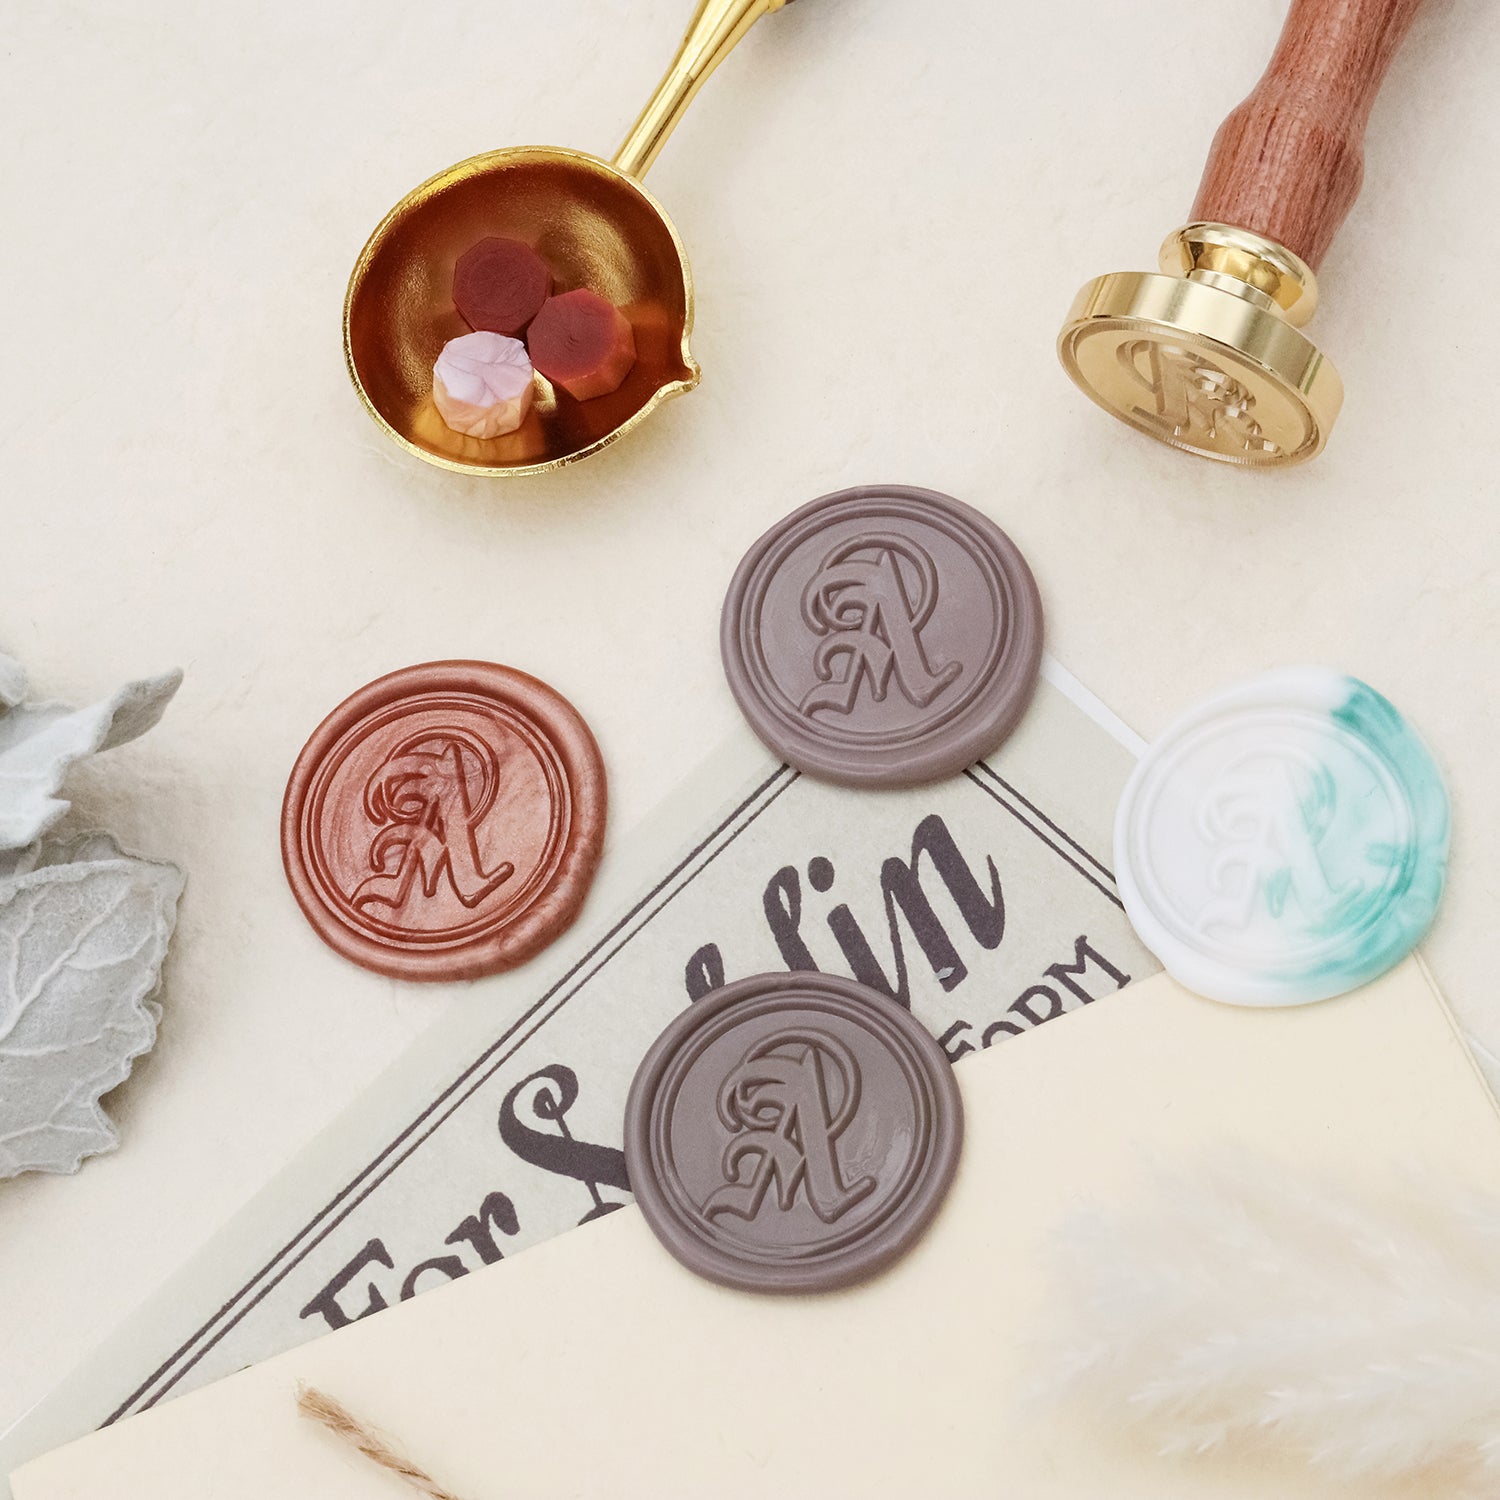 Wax Seal Stamp Set, European Style Wax Seal Stamp Kit Gift Box Set, Vintage Personalized  Wax Seal Stamp Letter Cards Invitations - AliExpress